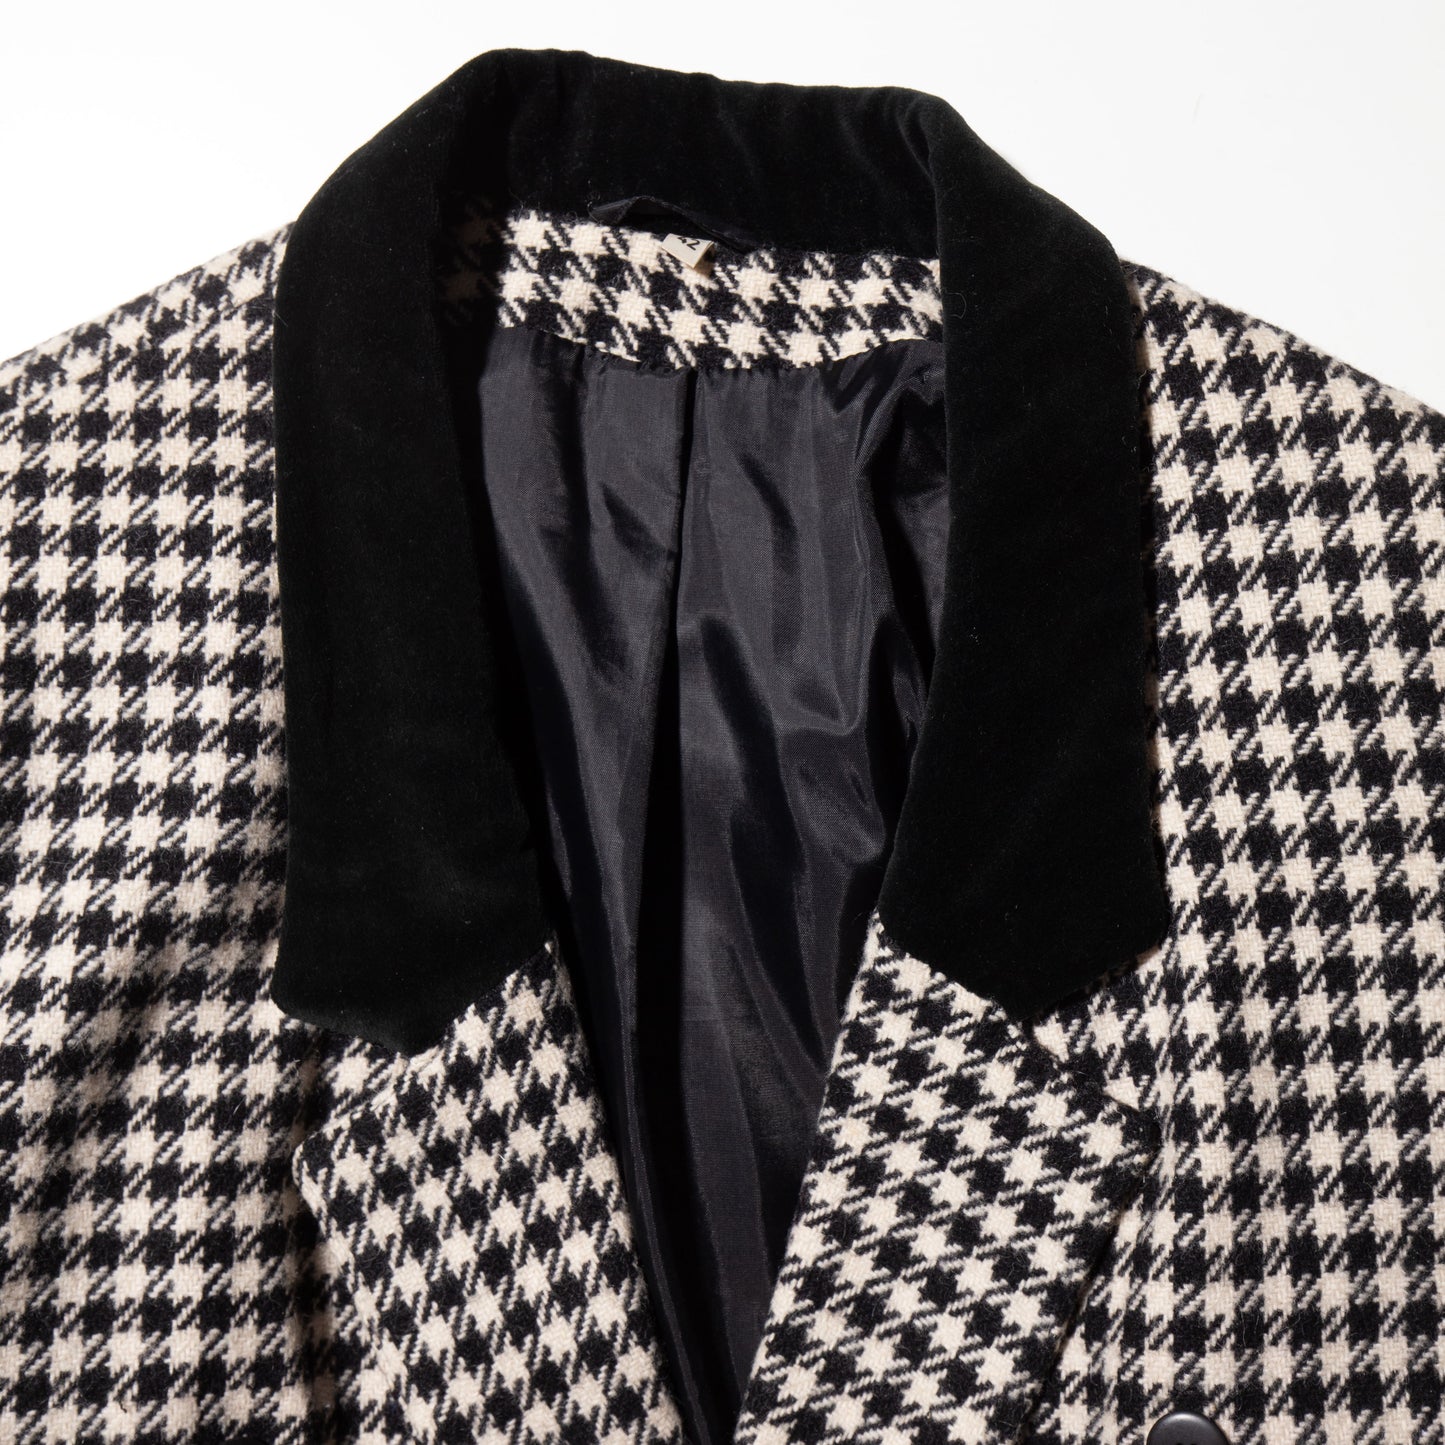 vintage houndstooth double breasted tailored jacket